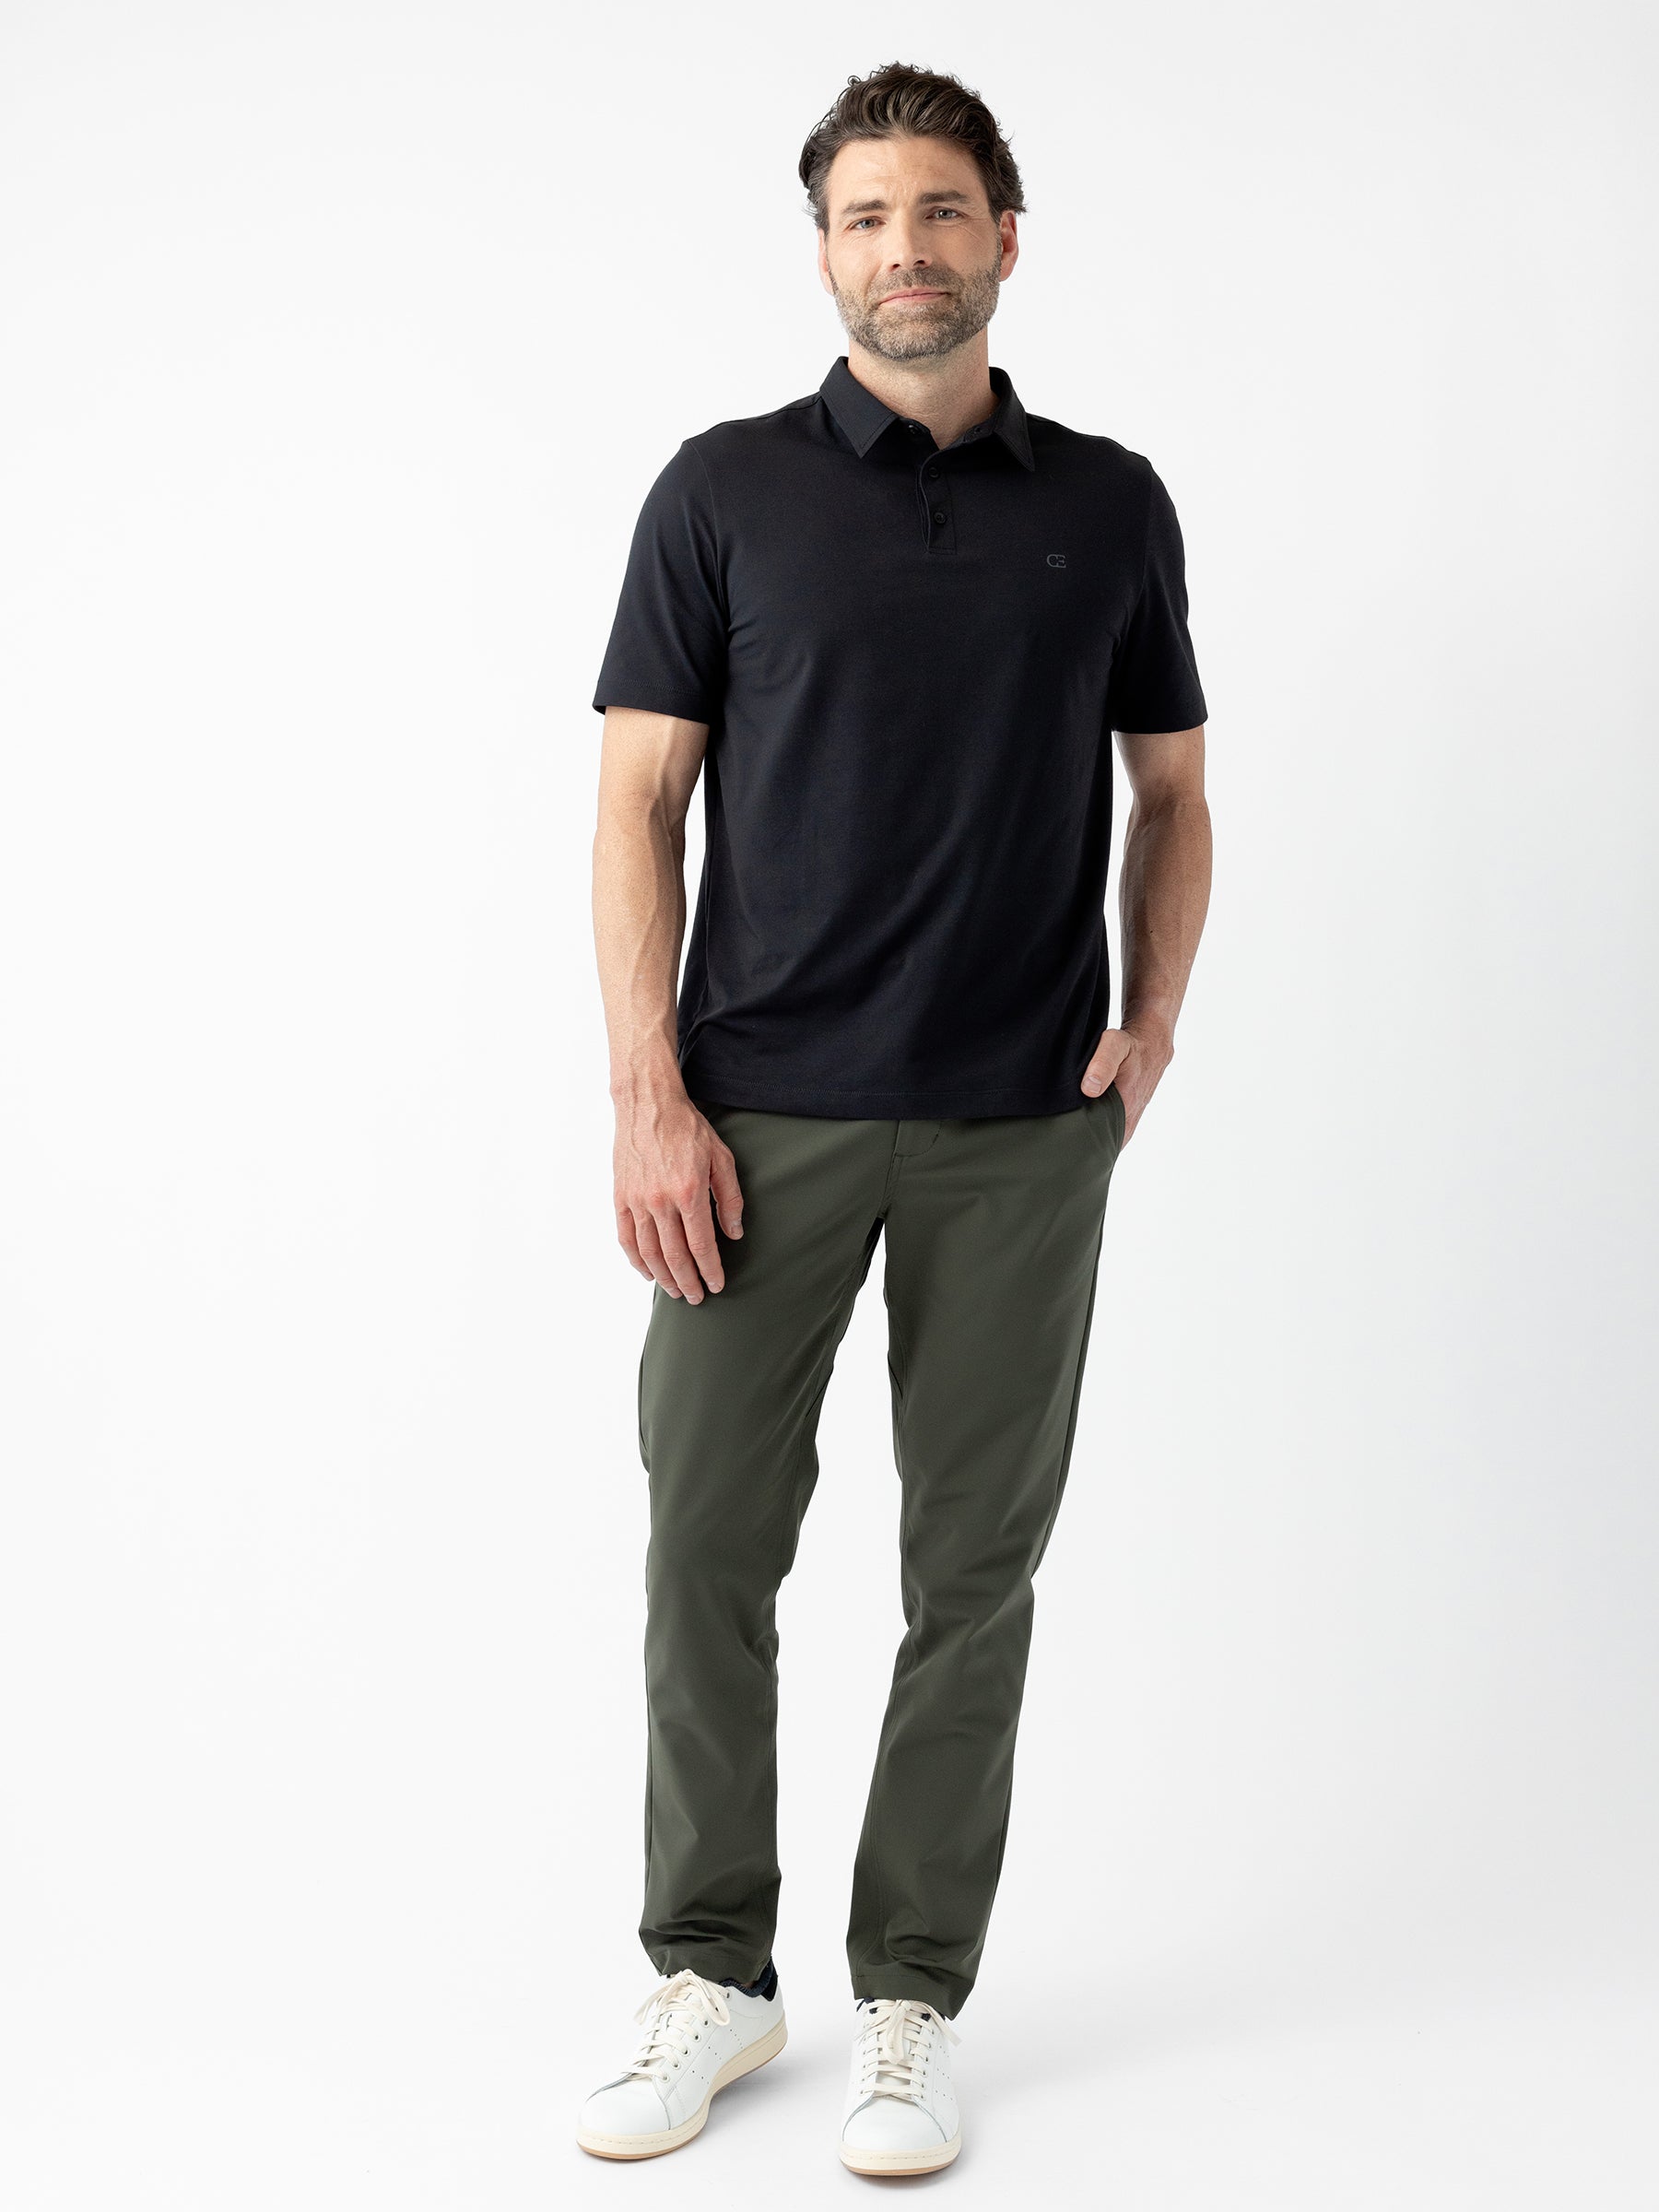 A man with short dark hair and a beard stands against a white background. He is wearing Cozy Earth's Men's Everyday Polo in black, olive green pants, and white sneakers. His left hand is in his pants pocket, and he has a relaxed expression. |Color:Jet Black